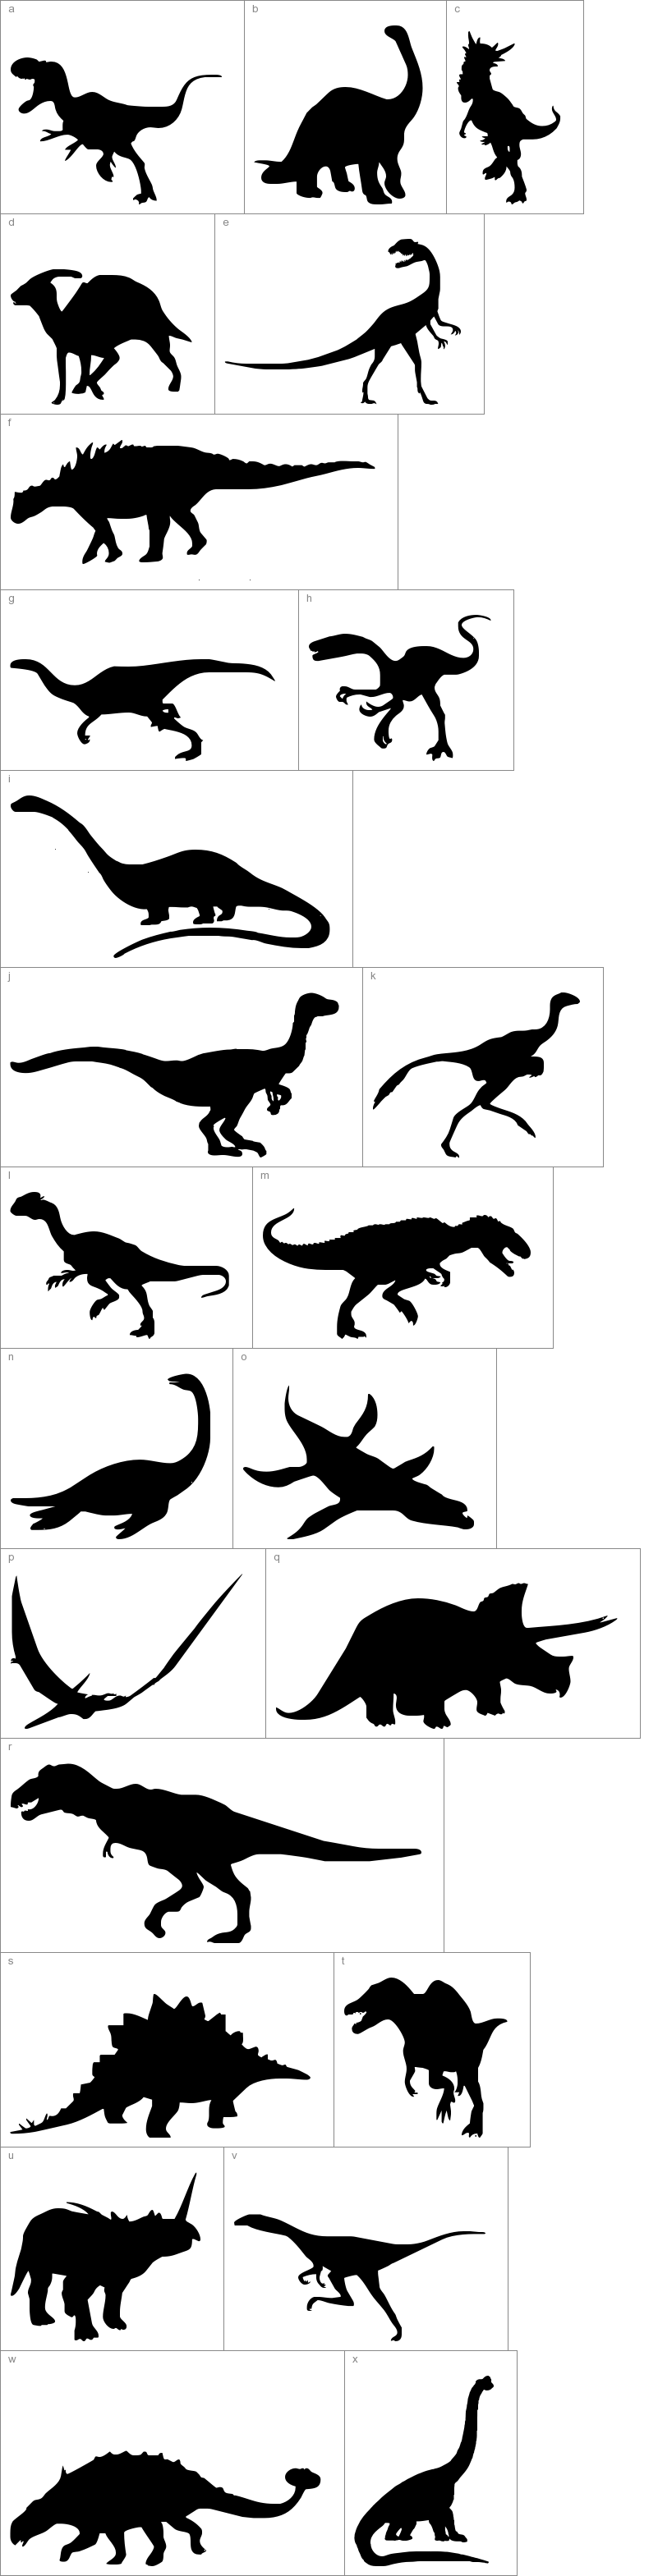 Dinosaur Dingbats Silhouettes, Stencil, Templates….Great for a Boysroom Wallpainting or Dino Party!